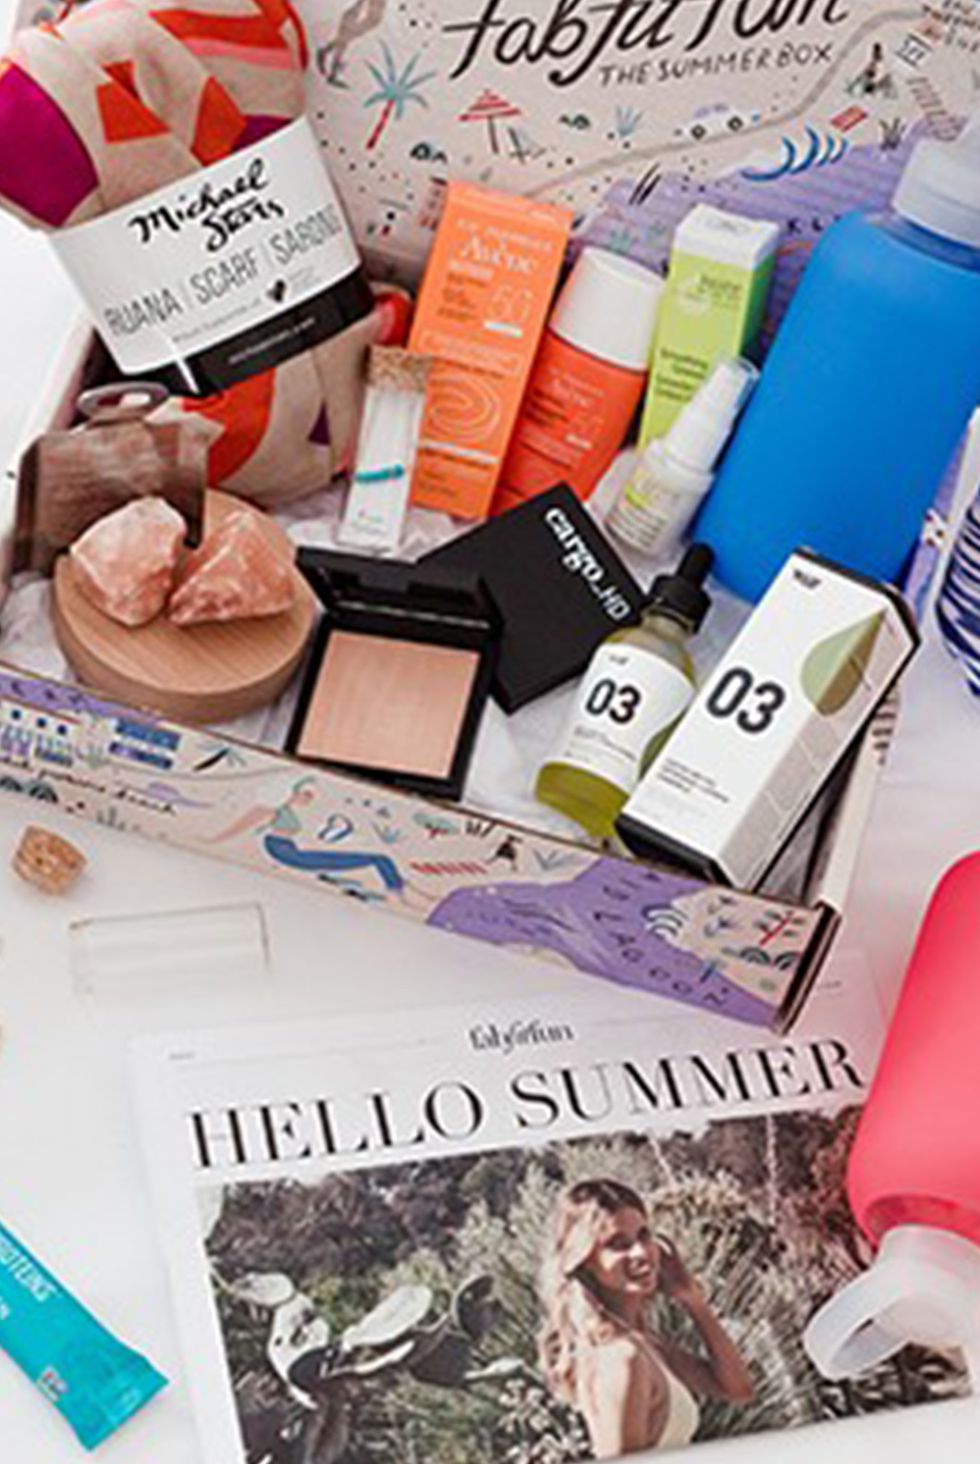 Best Beauty Subscription Boxes Every Woman Should Try!